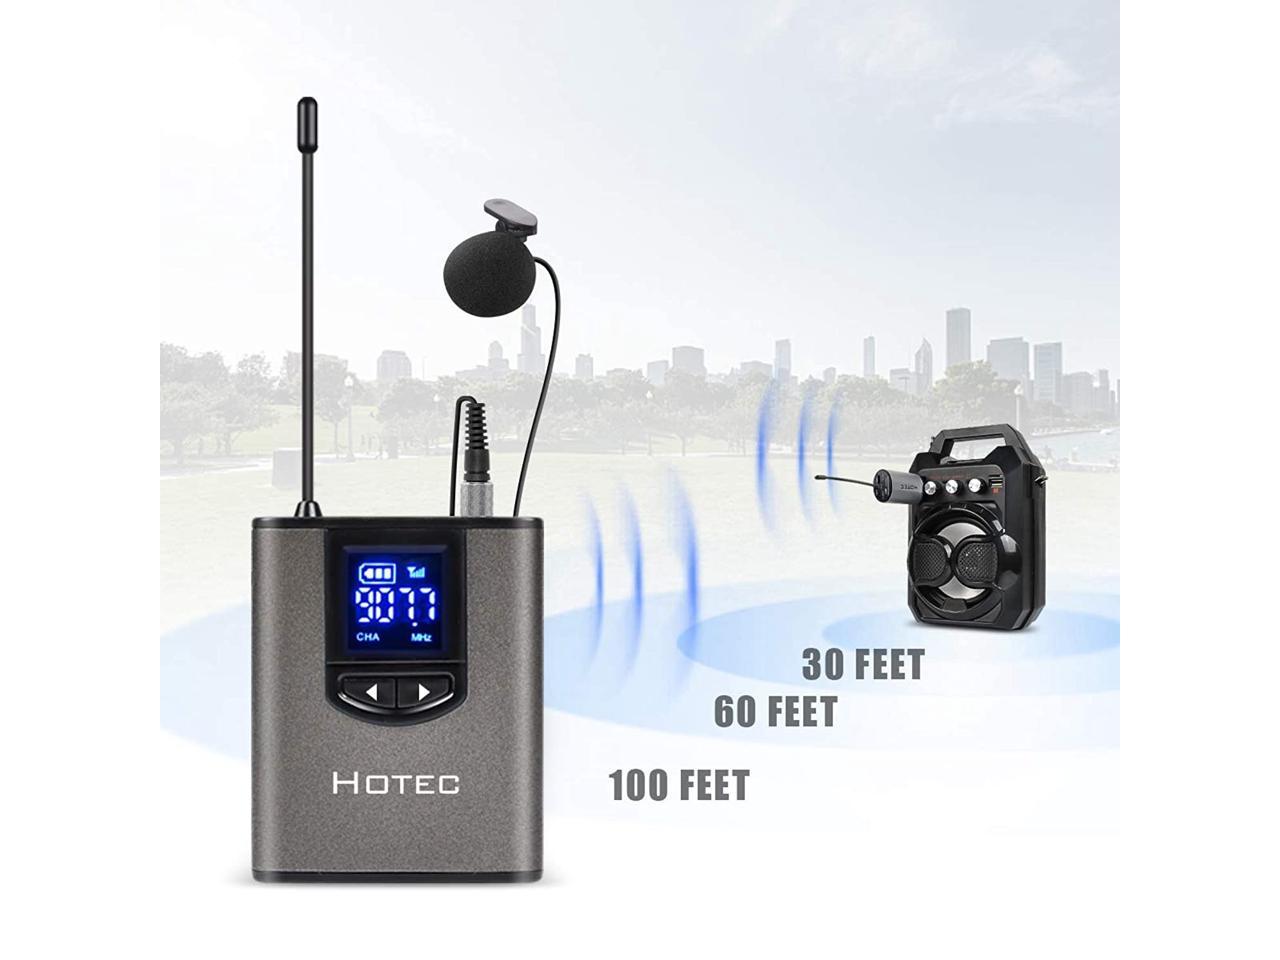 Bodypack Transmitters and One Mini Rechargeable Receiver 1/4 Output for Live Performances Hotec Wireless Dual Headset Microphones/Lavalier Lapel Mics include Storage Case 